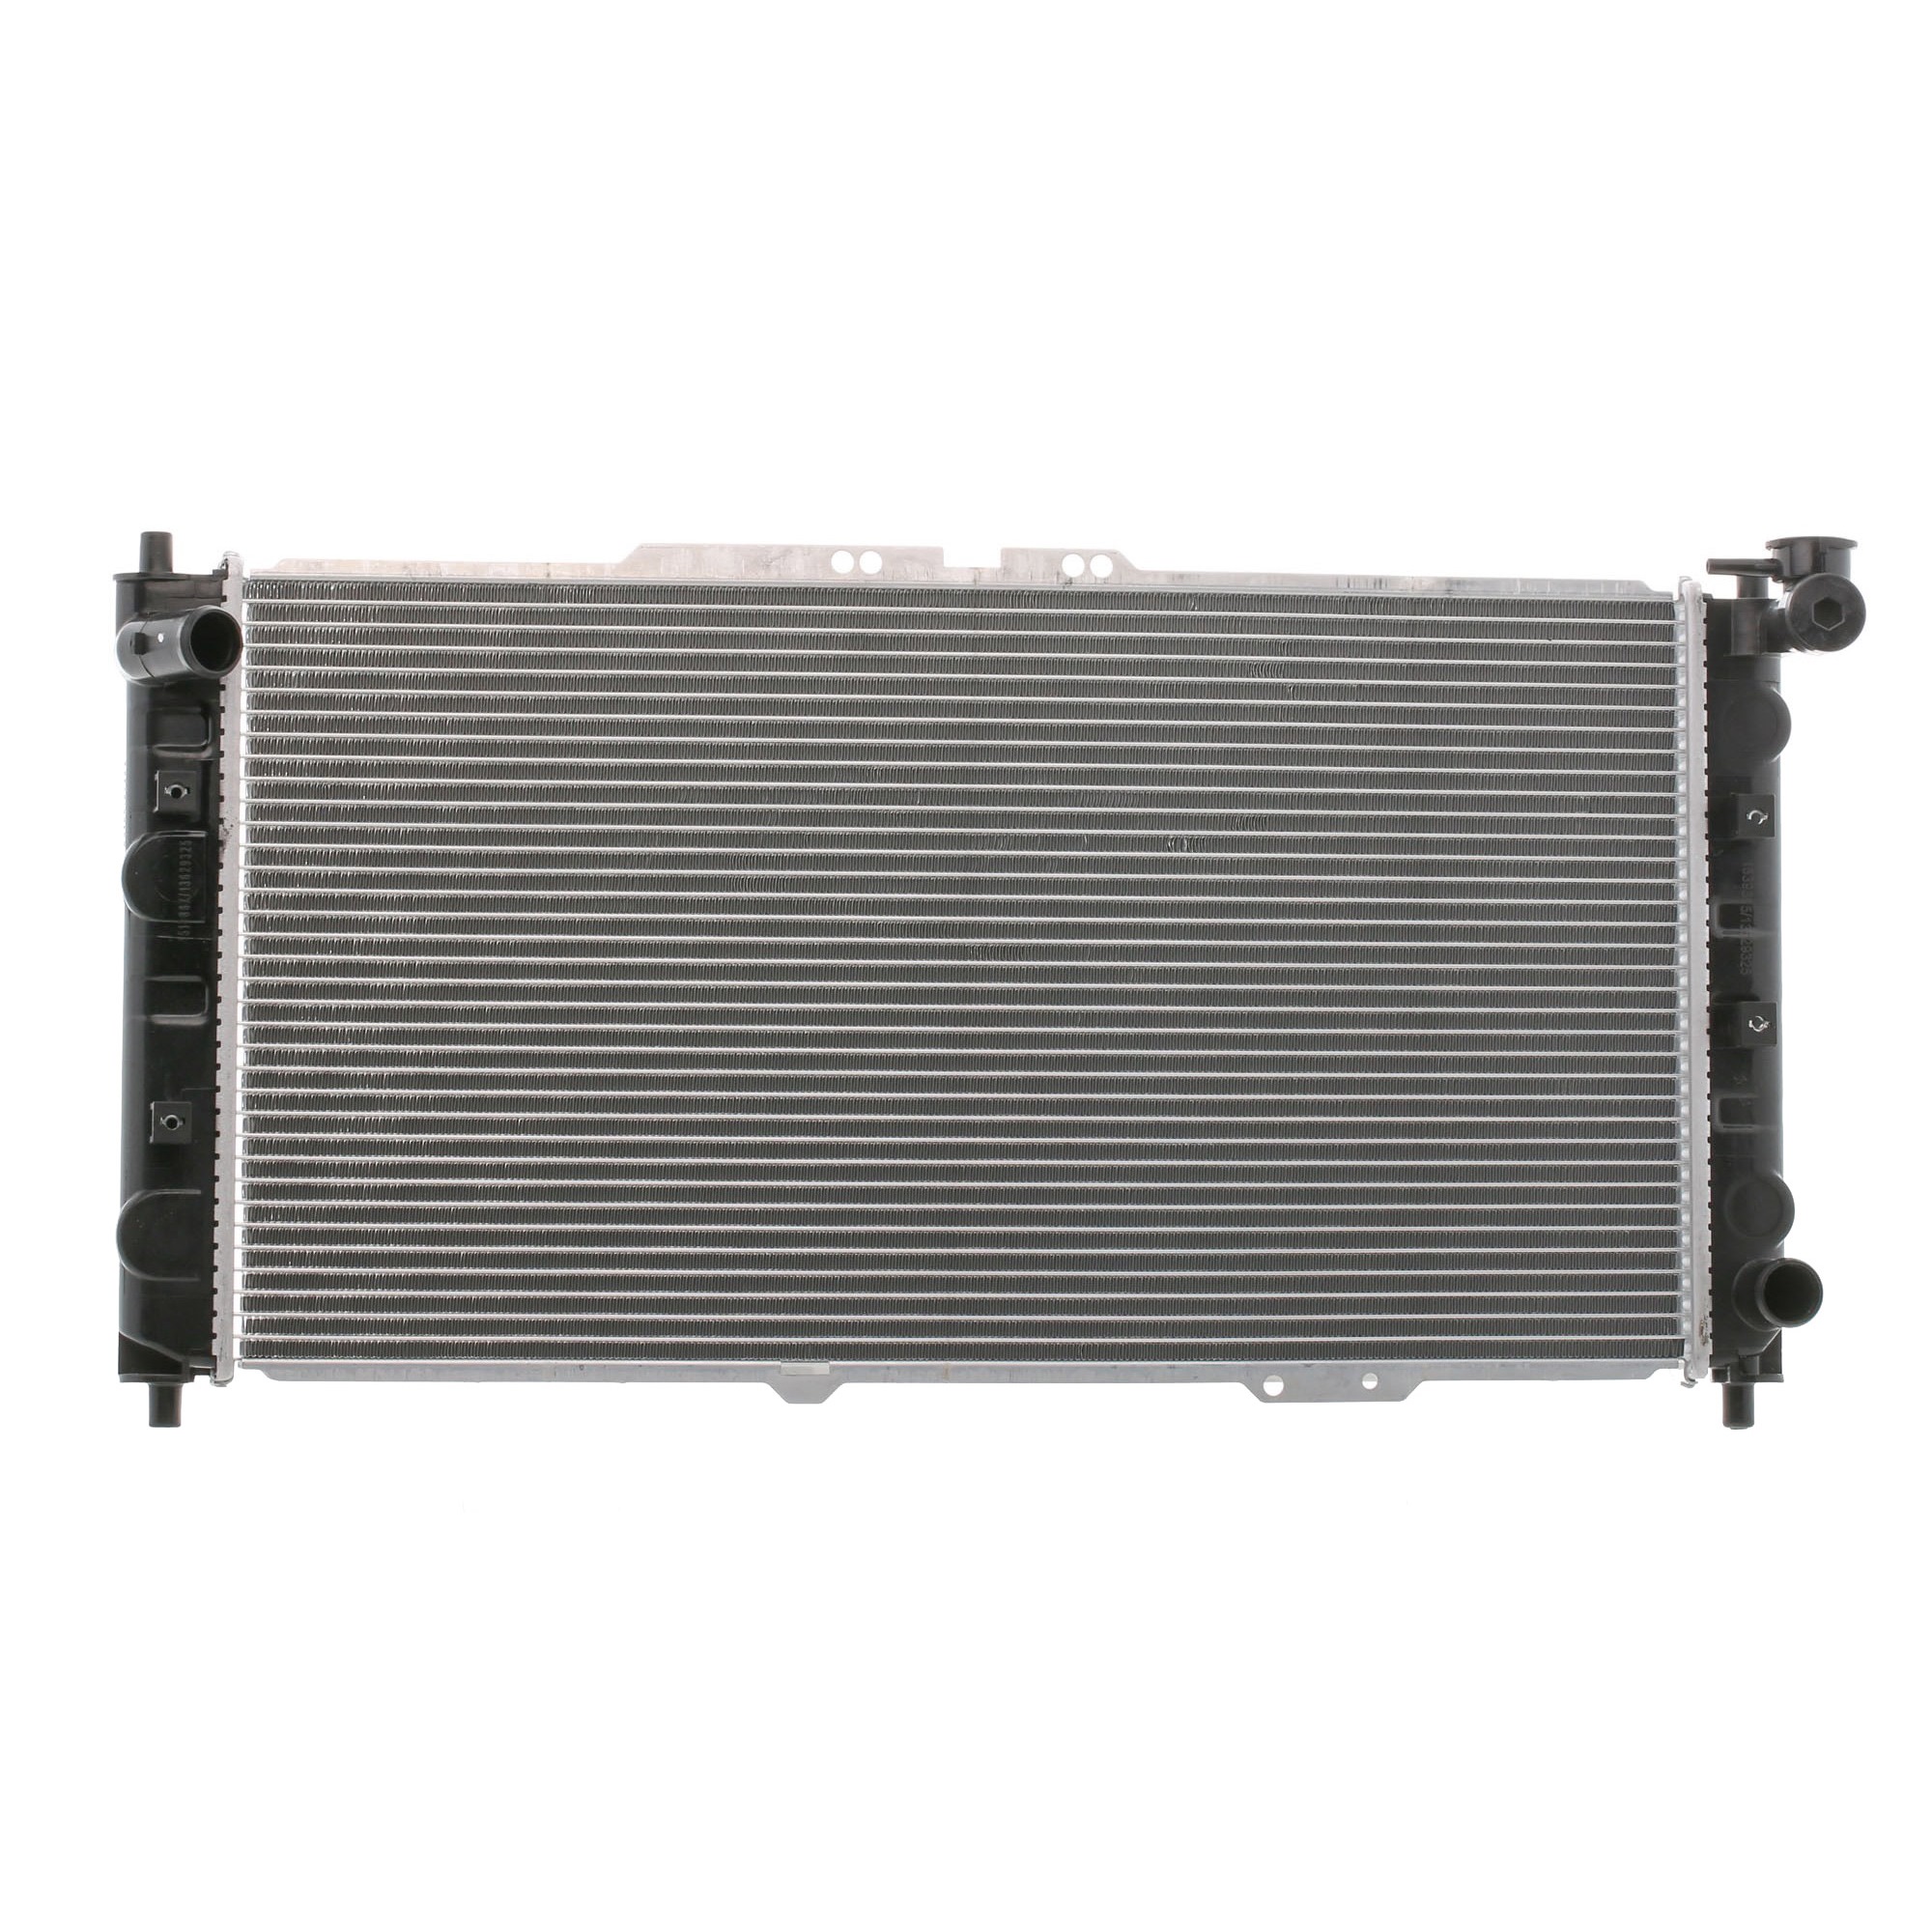 RIDEX 470R0062 Engine radiator Aluminium, Plastic, for vehicles with/without air conditioning, 670 x 349 x 22 mm, Manual Transmission